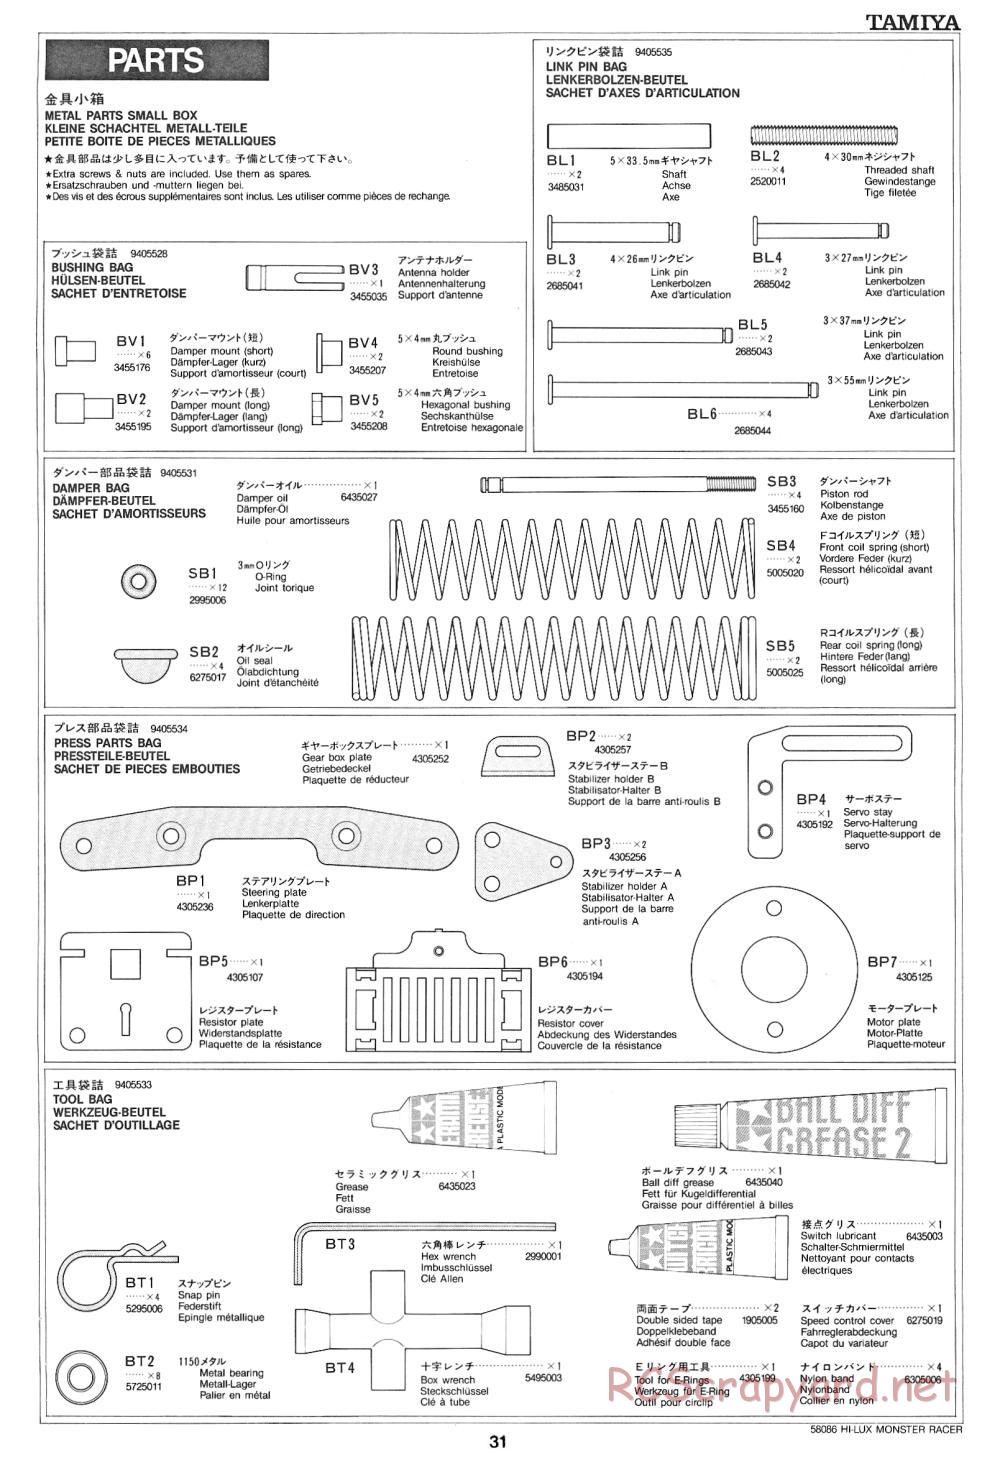 Tamiya - Toyota Hilux Monster Racer - 58086 - Manual - Page 31